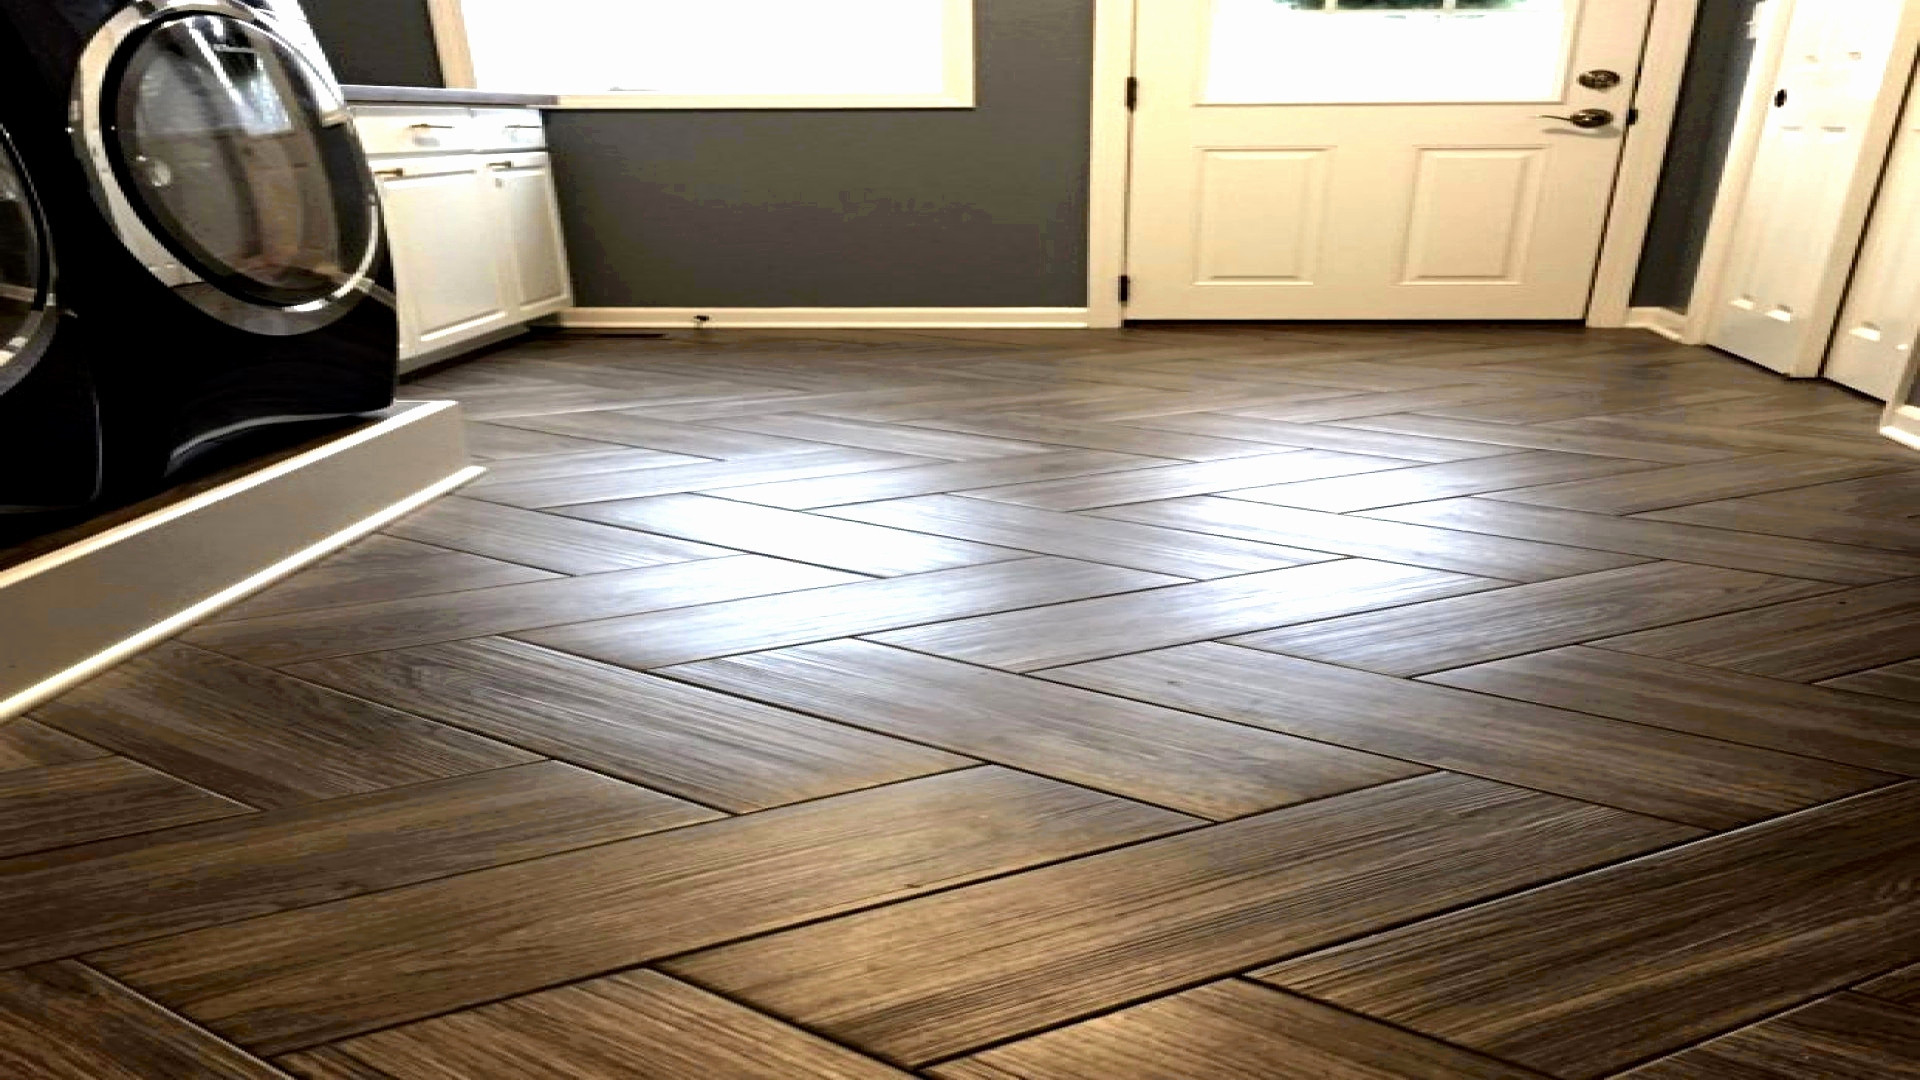 10 Popular Hardwood Flooring Cost 2022 free download hardwood flooring cost of flooring cost best wood floor stain elegant cost for new kitchen throughout flooring cost 4305 laminate flooring cost 50 luxury vinyl flooring cost per sq ft